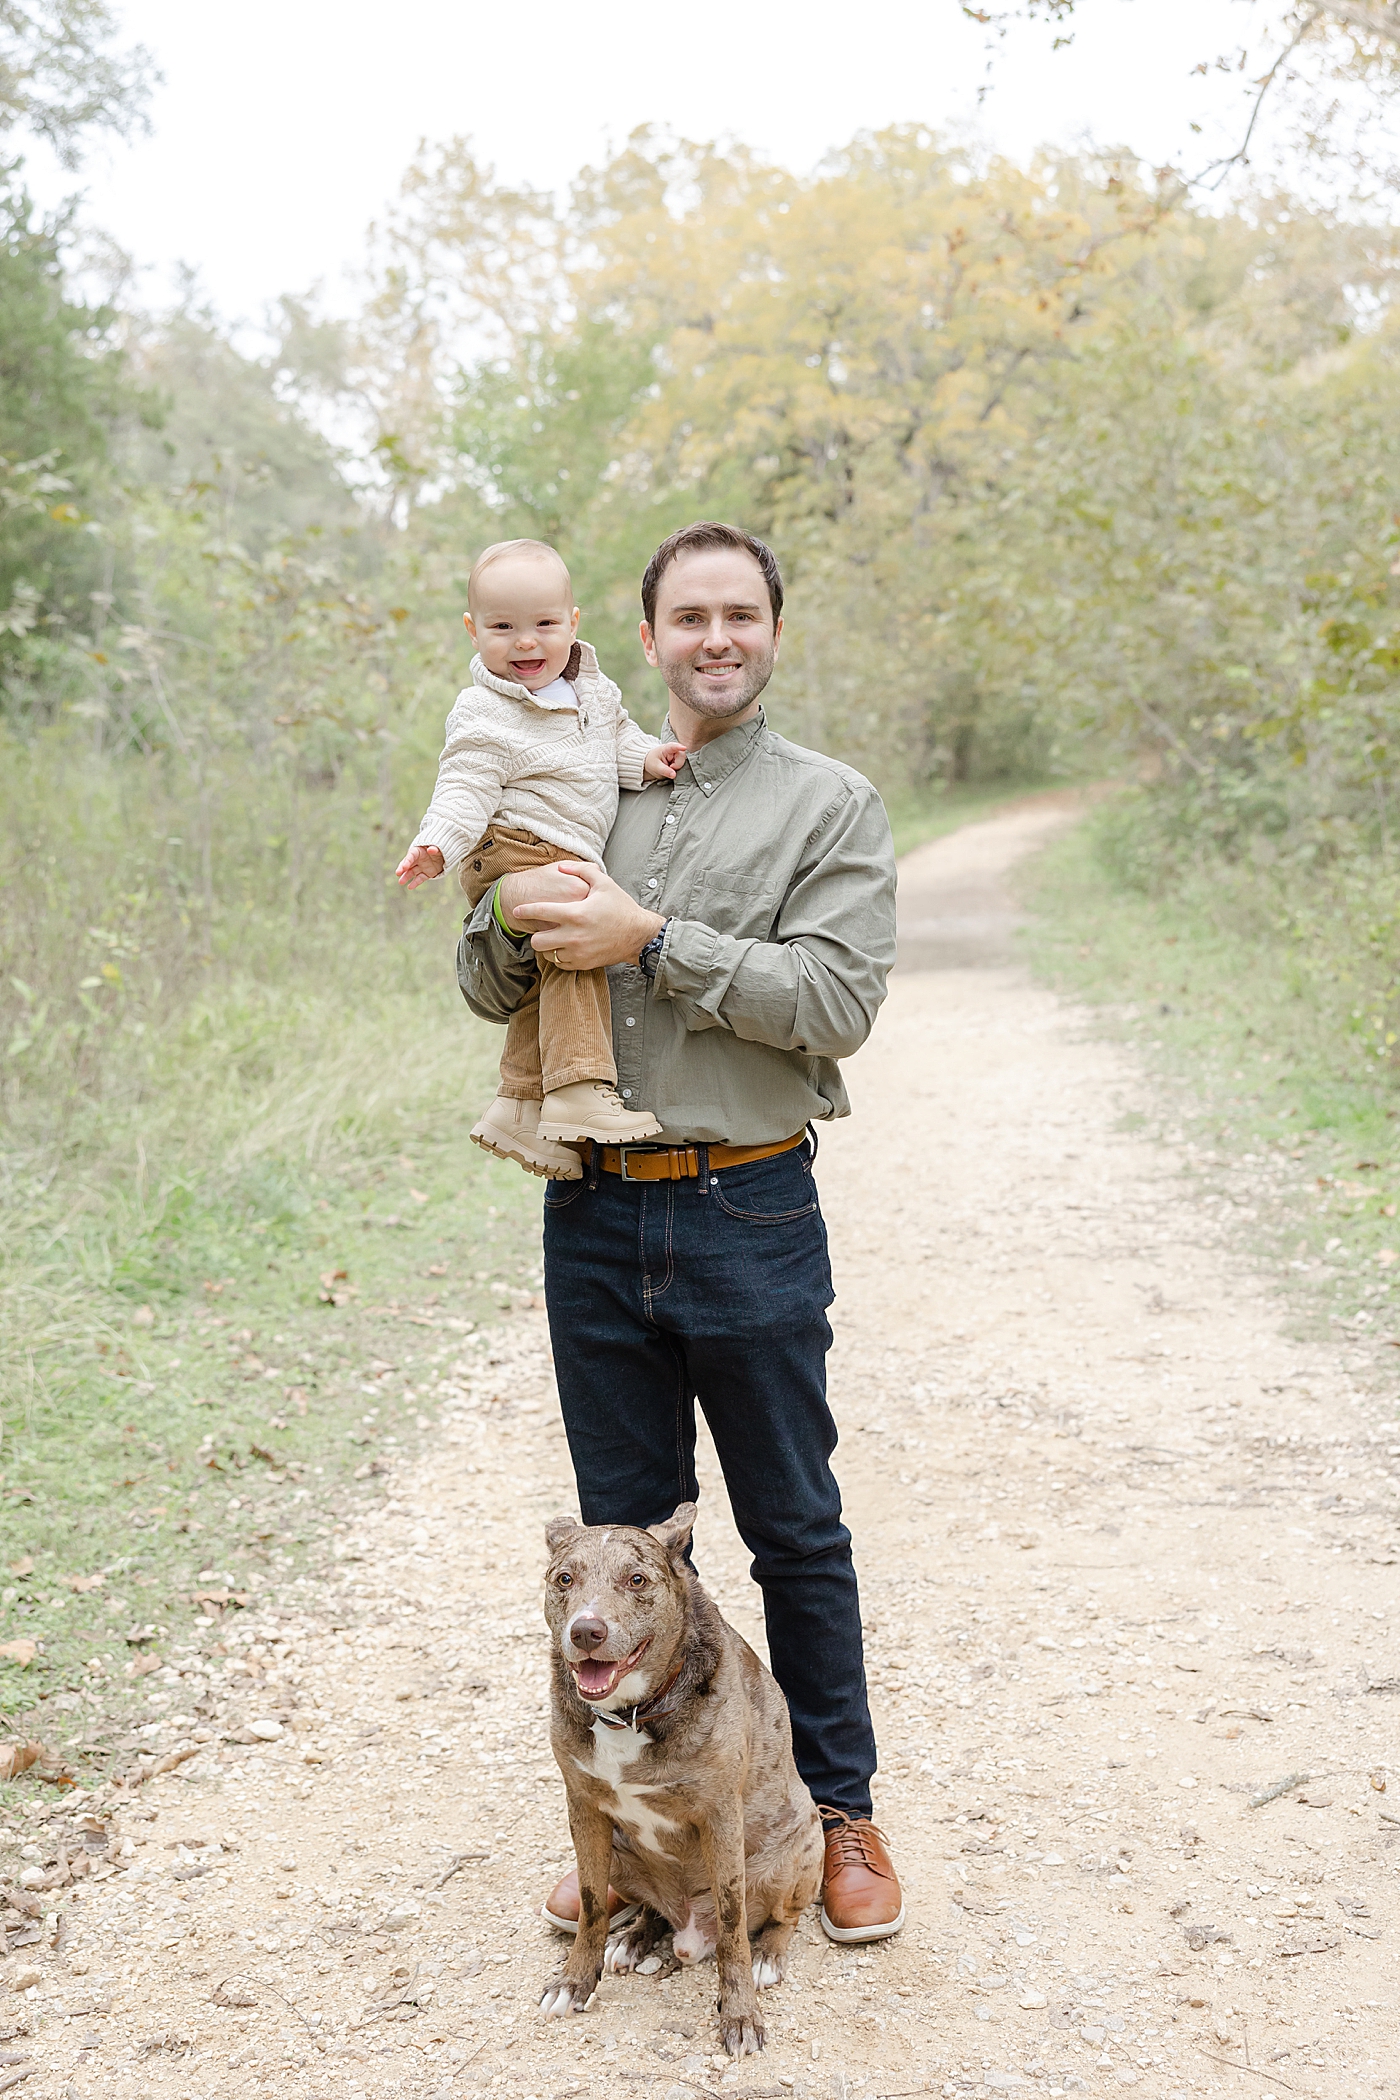 Dad holding his little boy with their dog on a dirt path | Image by Sana Ahmed Photography